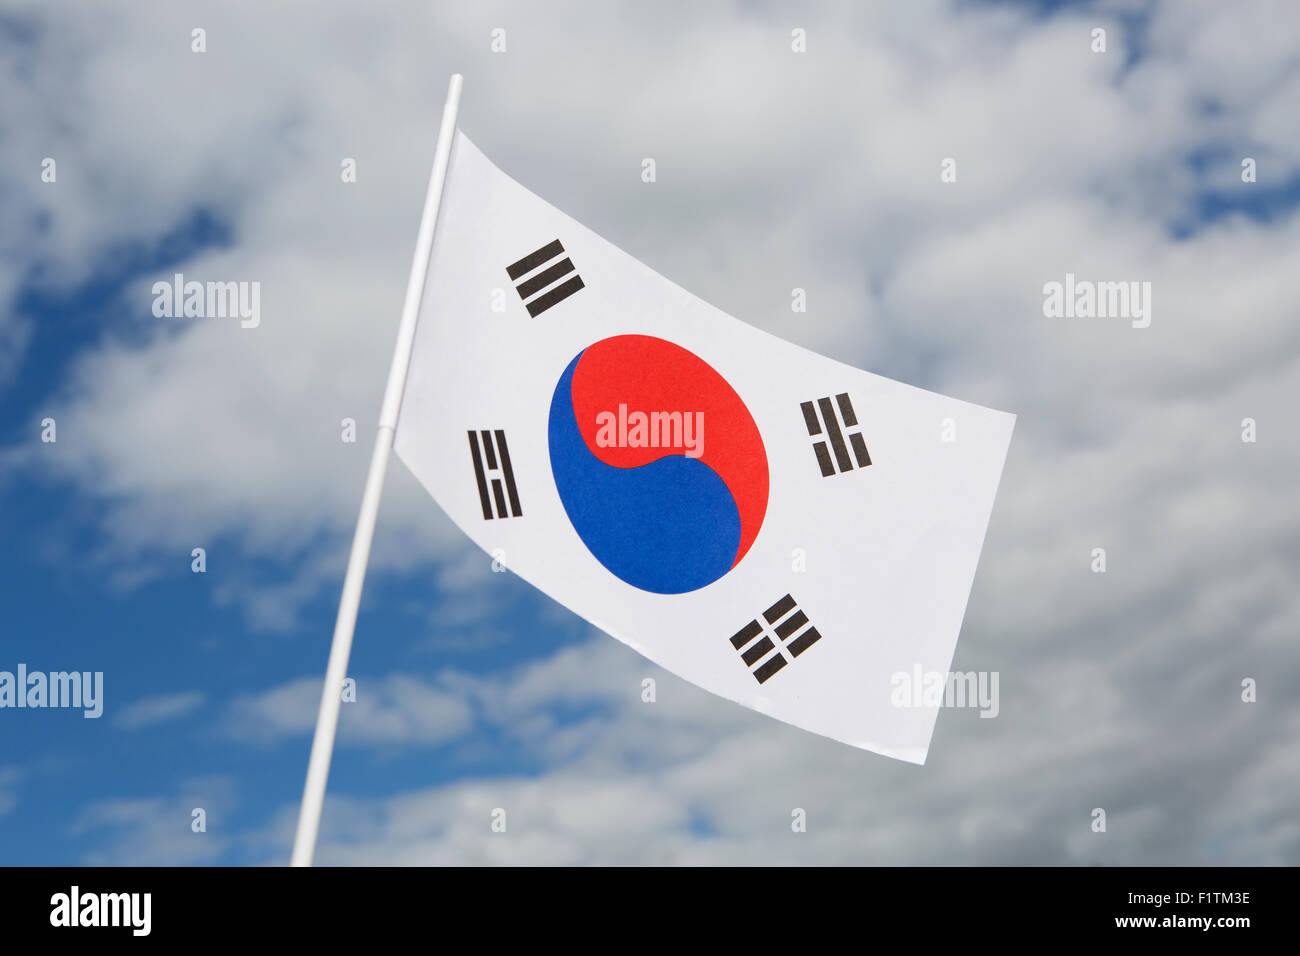 South Korea flag in front of a blue sky Stock Photo